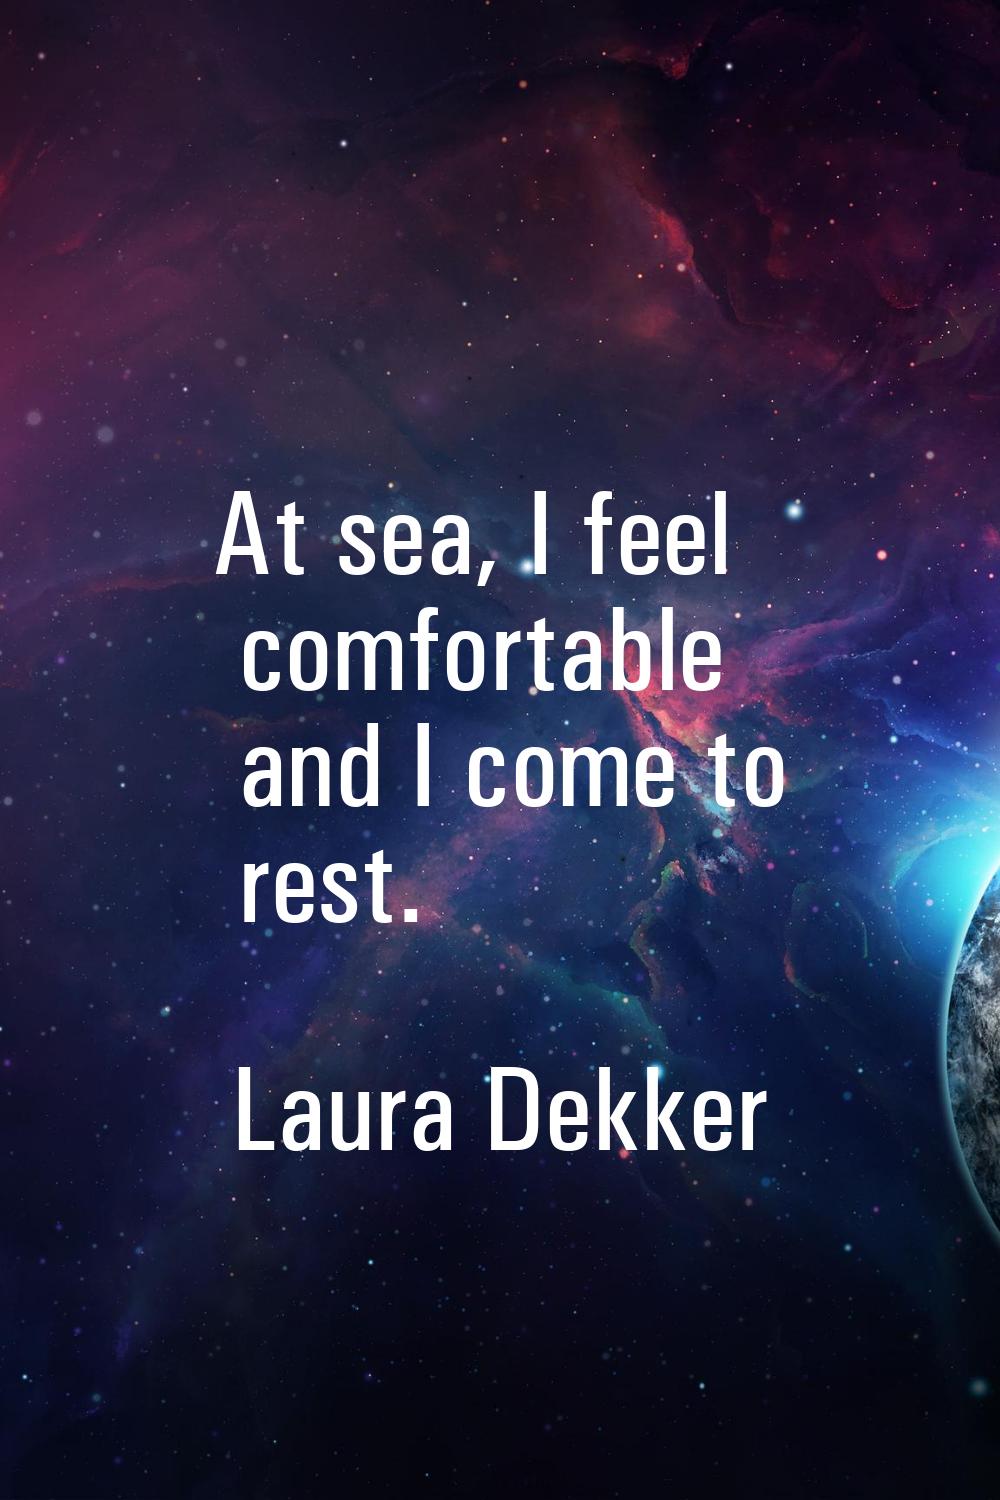 At sea, I feel comfortable and I come to rest.